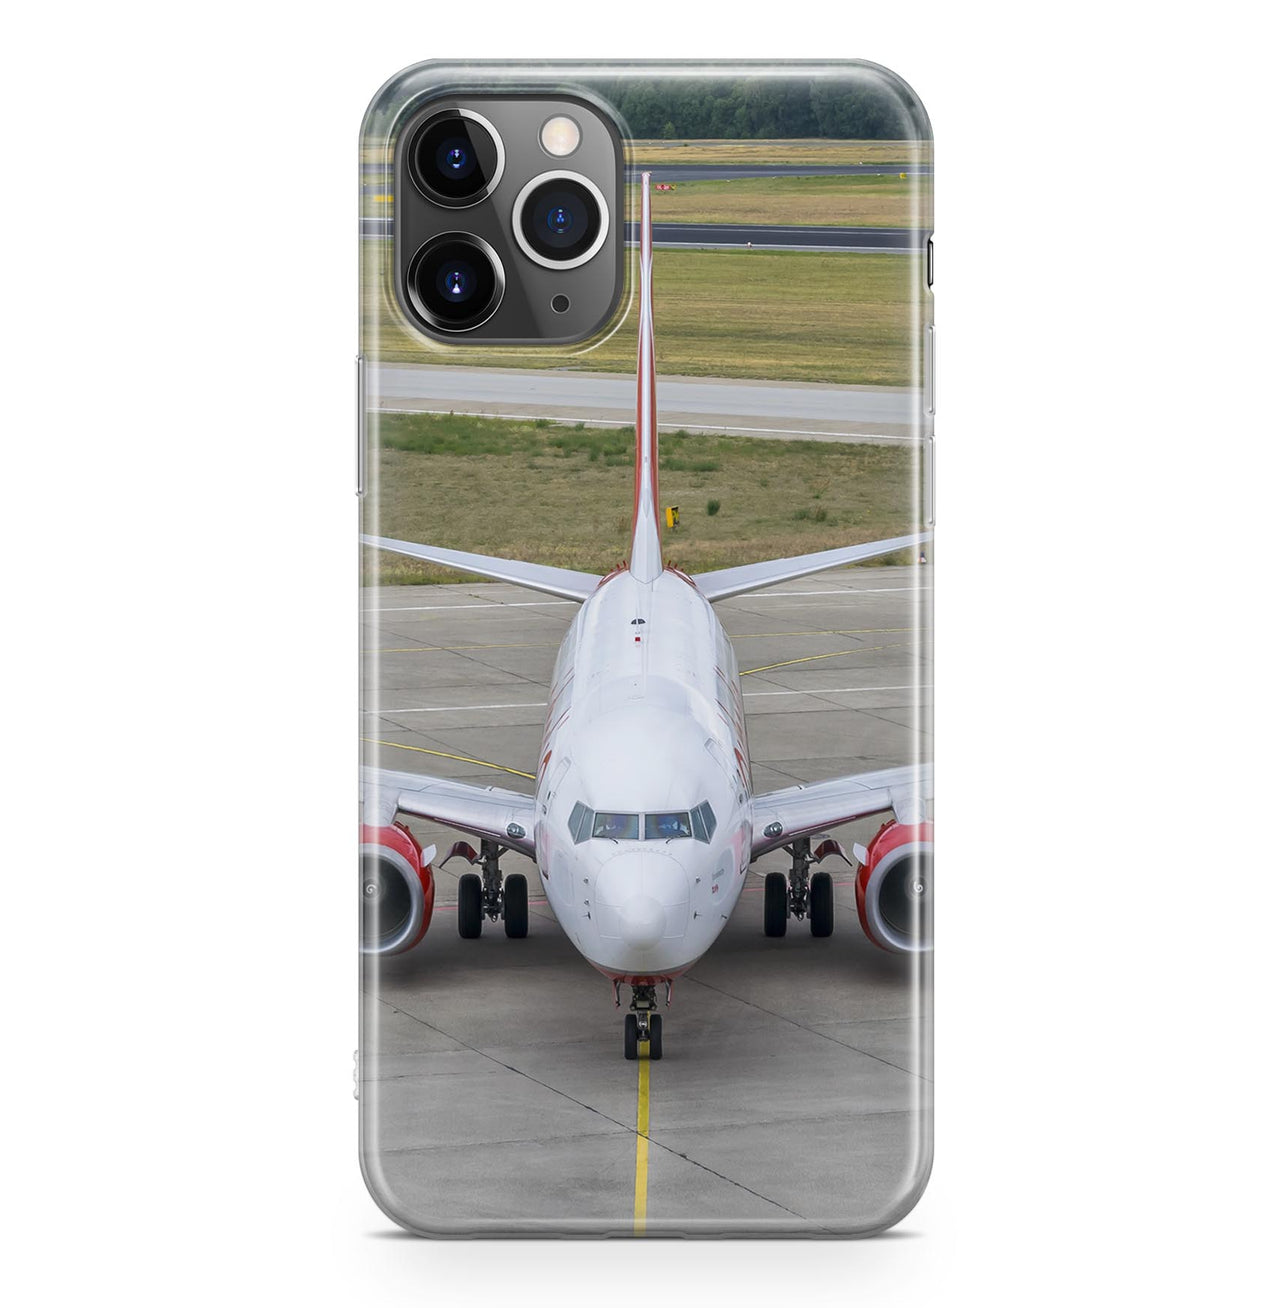 Face to Face with Boeing 737 Designed iPhone Cases